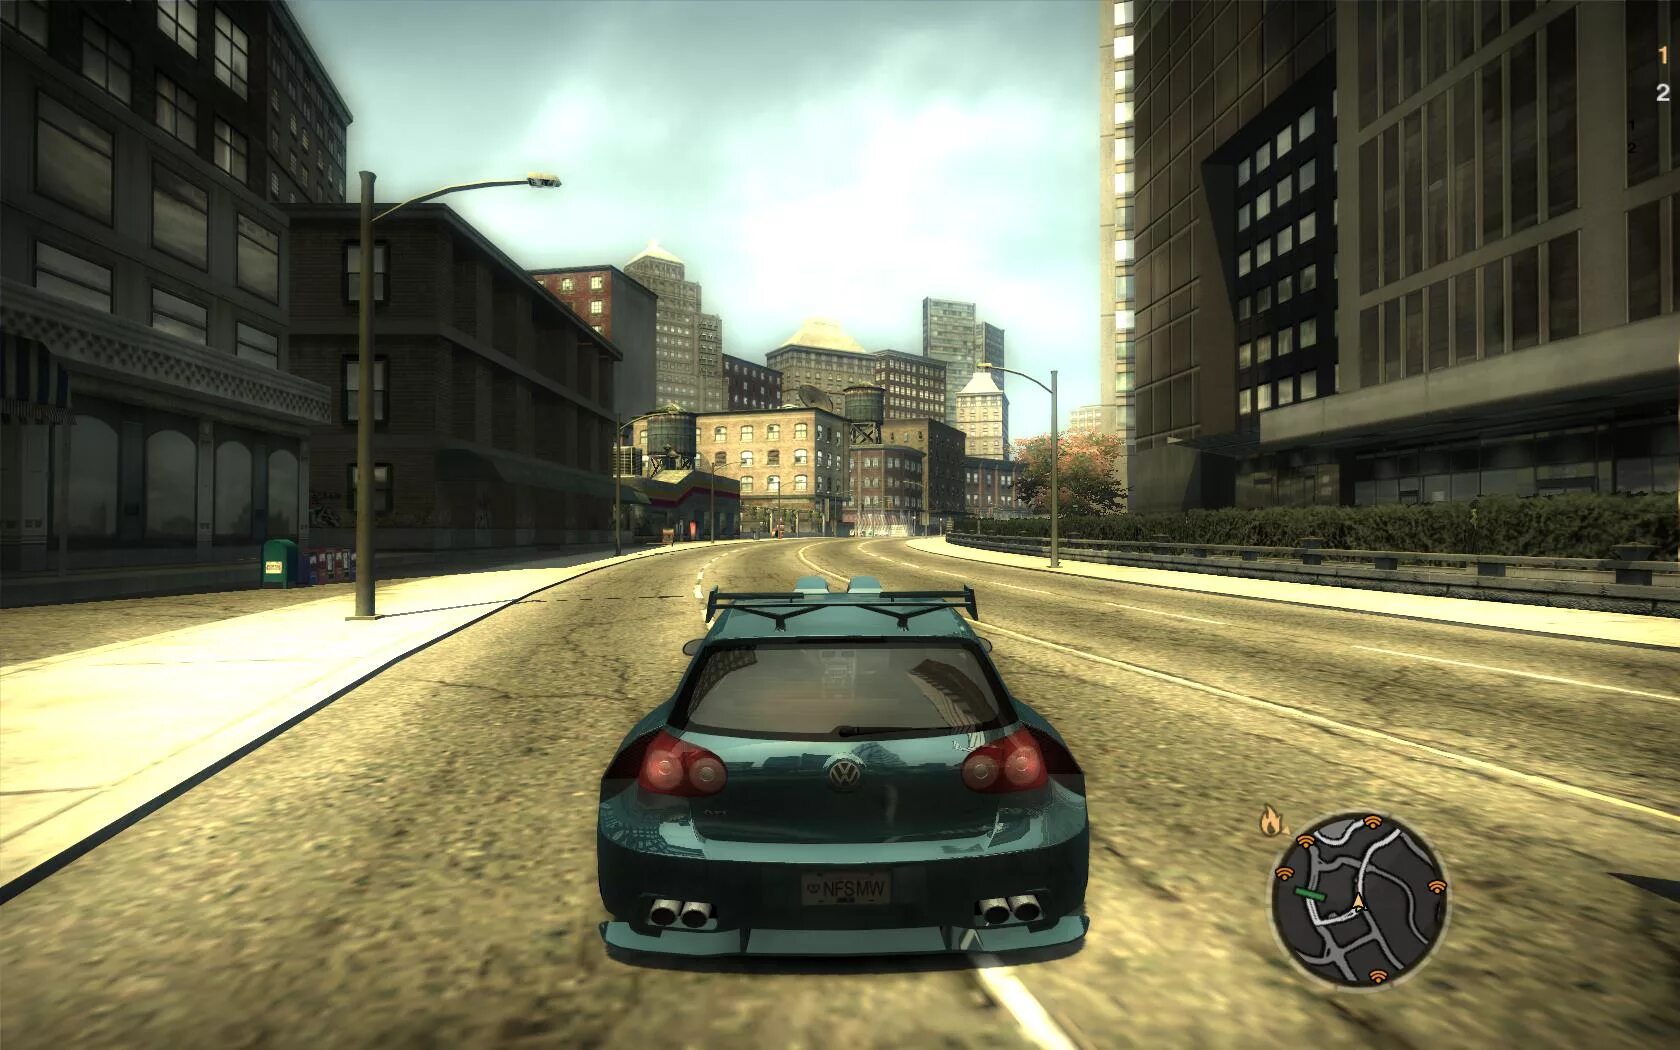 Need download. Need for Speed most wanted 2005. Нфс МВ 2005. Ned for Sped most Wan Ted 2005. Нитфор СПИД мост вантед 2005.